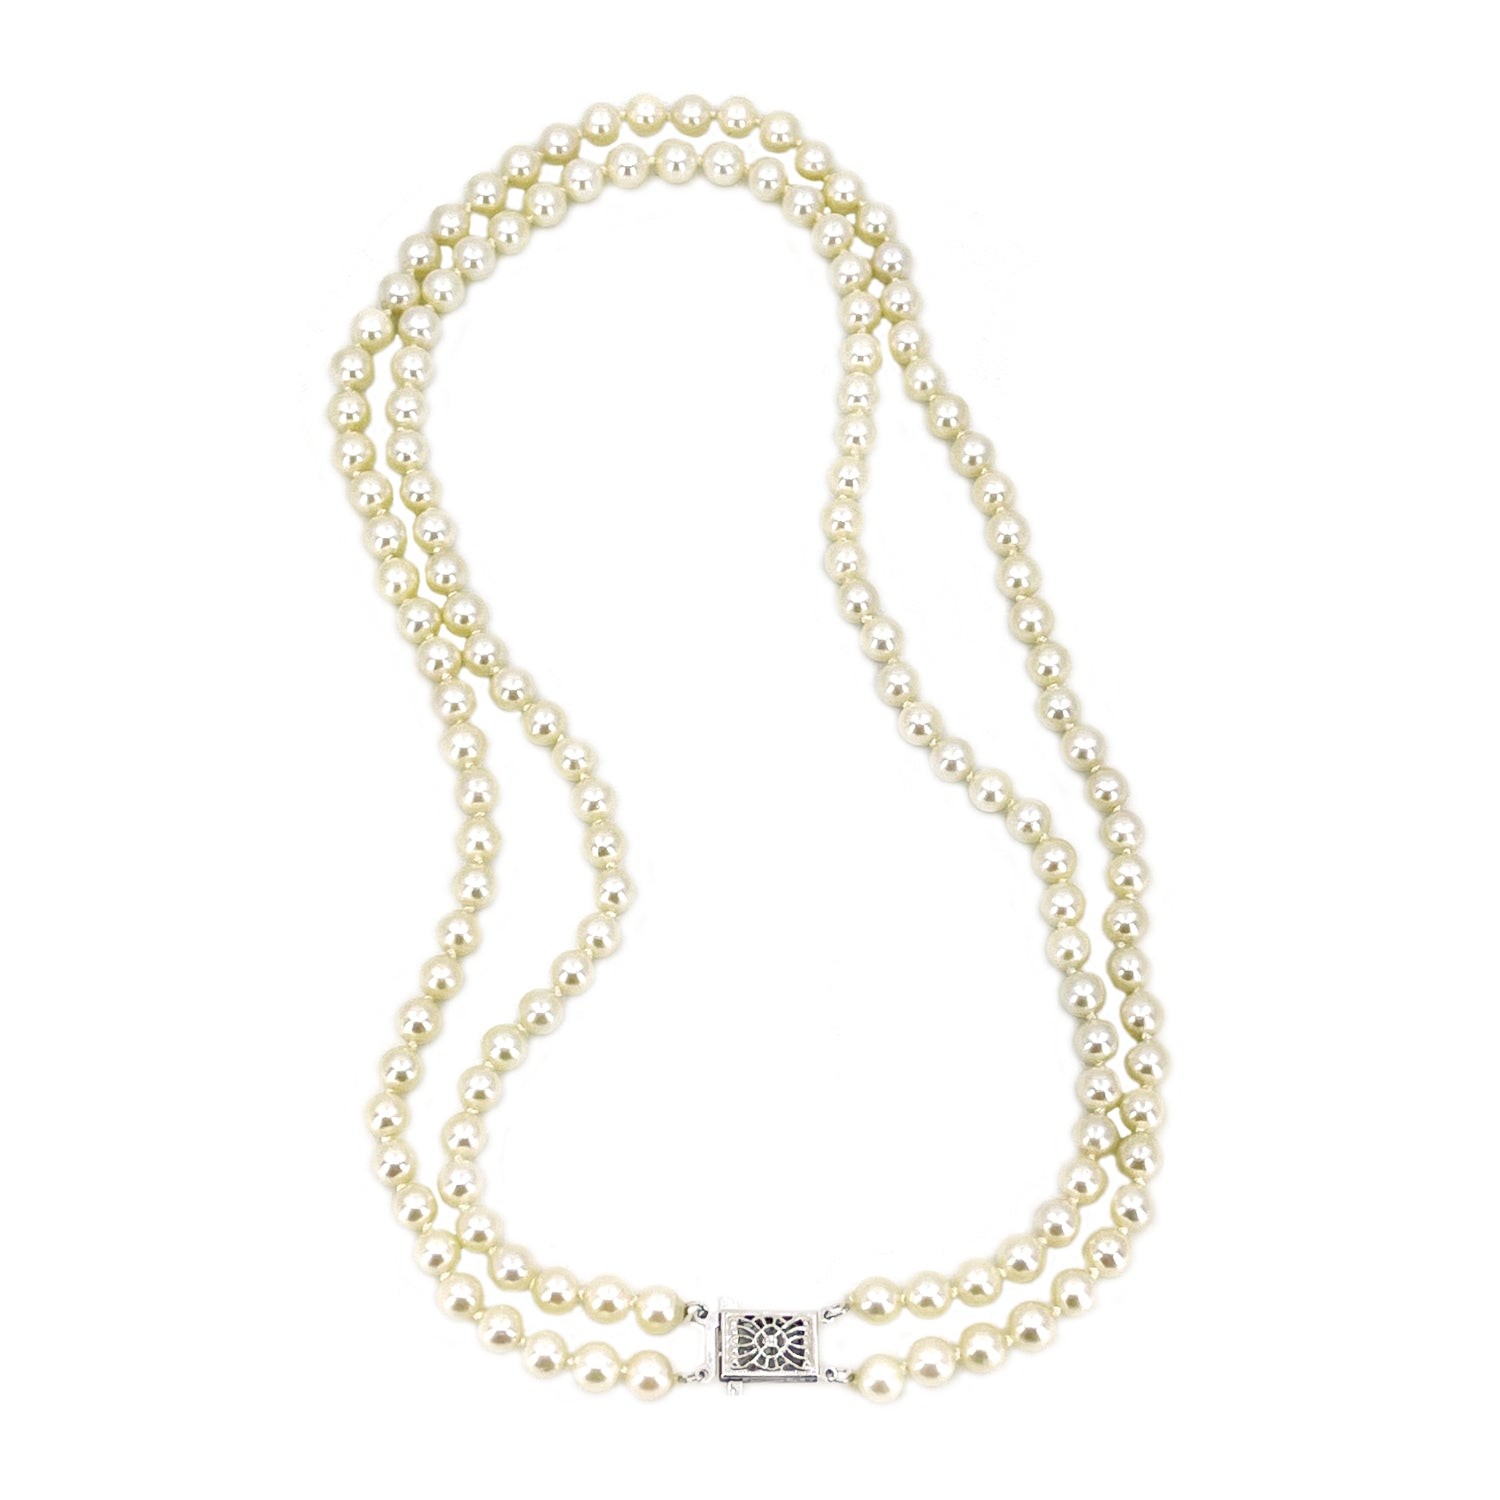 Vintage Double Strand Choker Filigree Japanese Saltwater Cultured Akoya Pearl Necklace - 14K White Gold 15.50 & 16.75 Inch